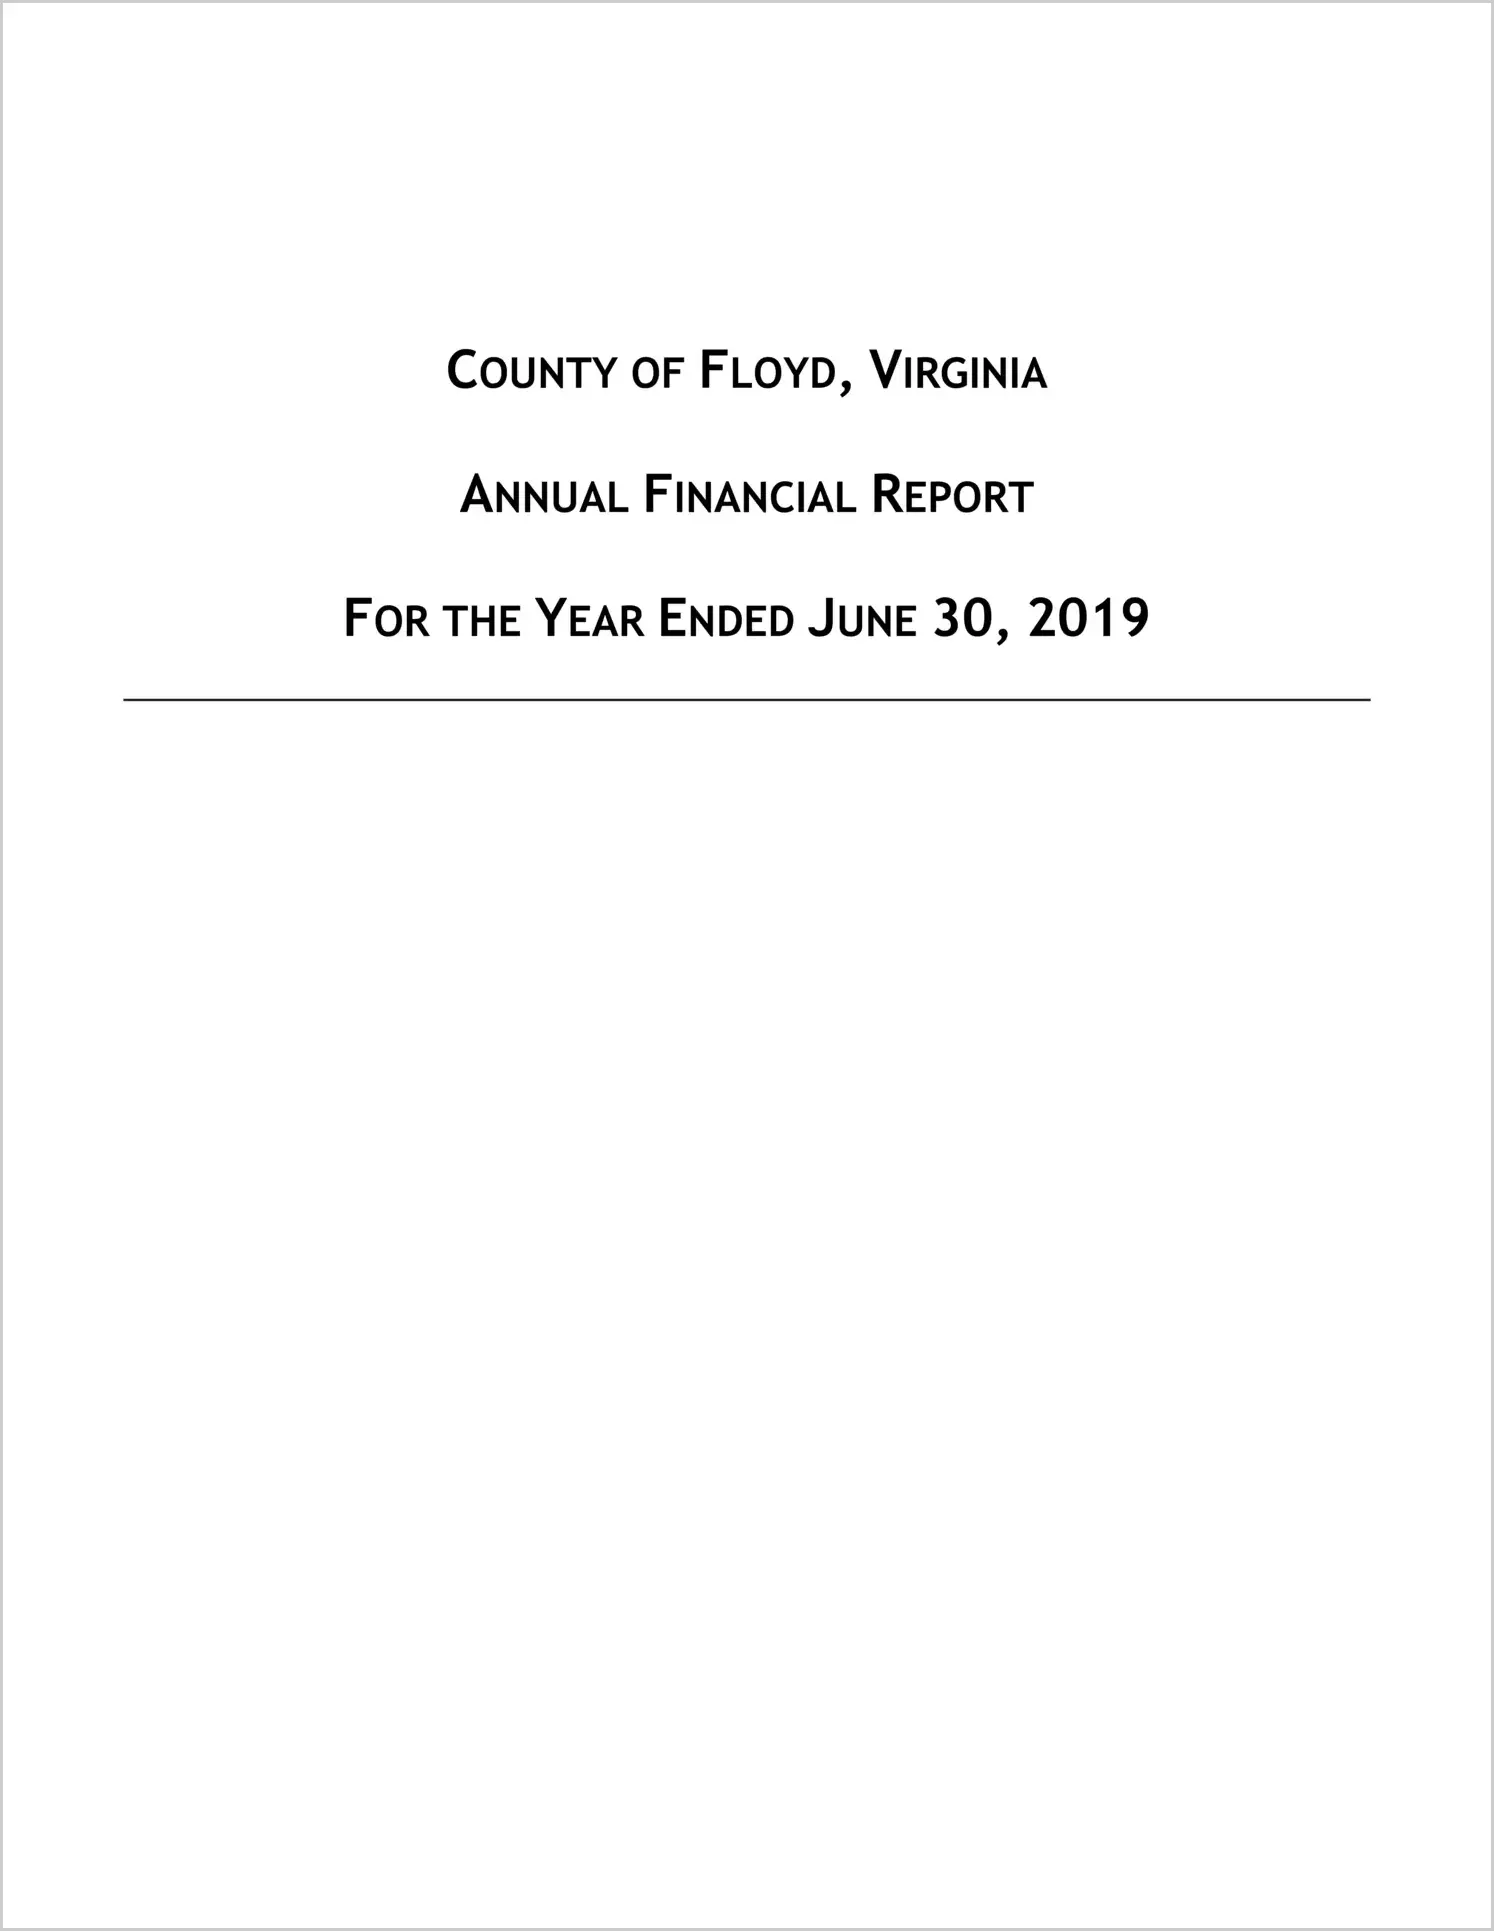 2019 Annual Financial Report for County of Floyd